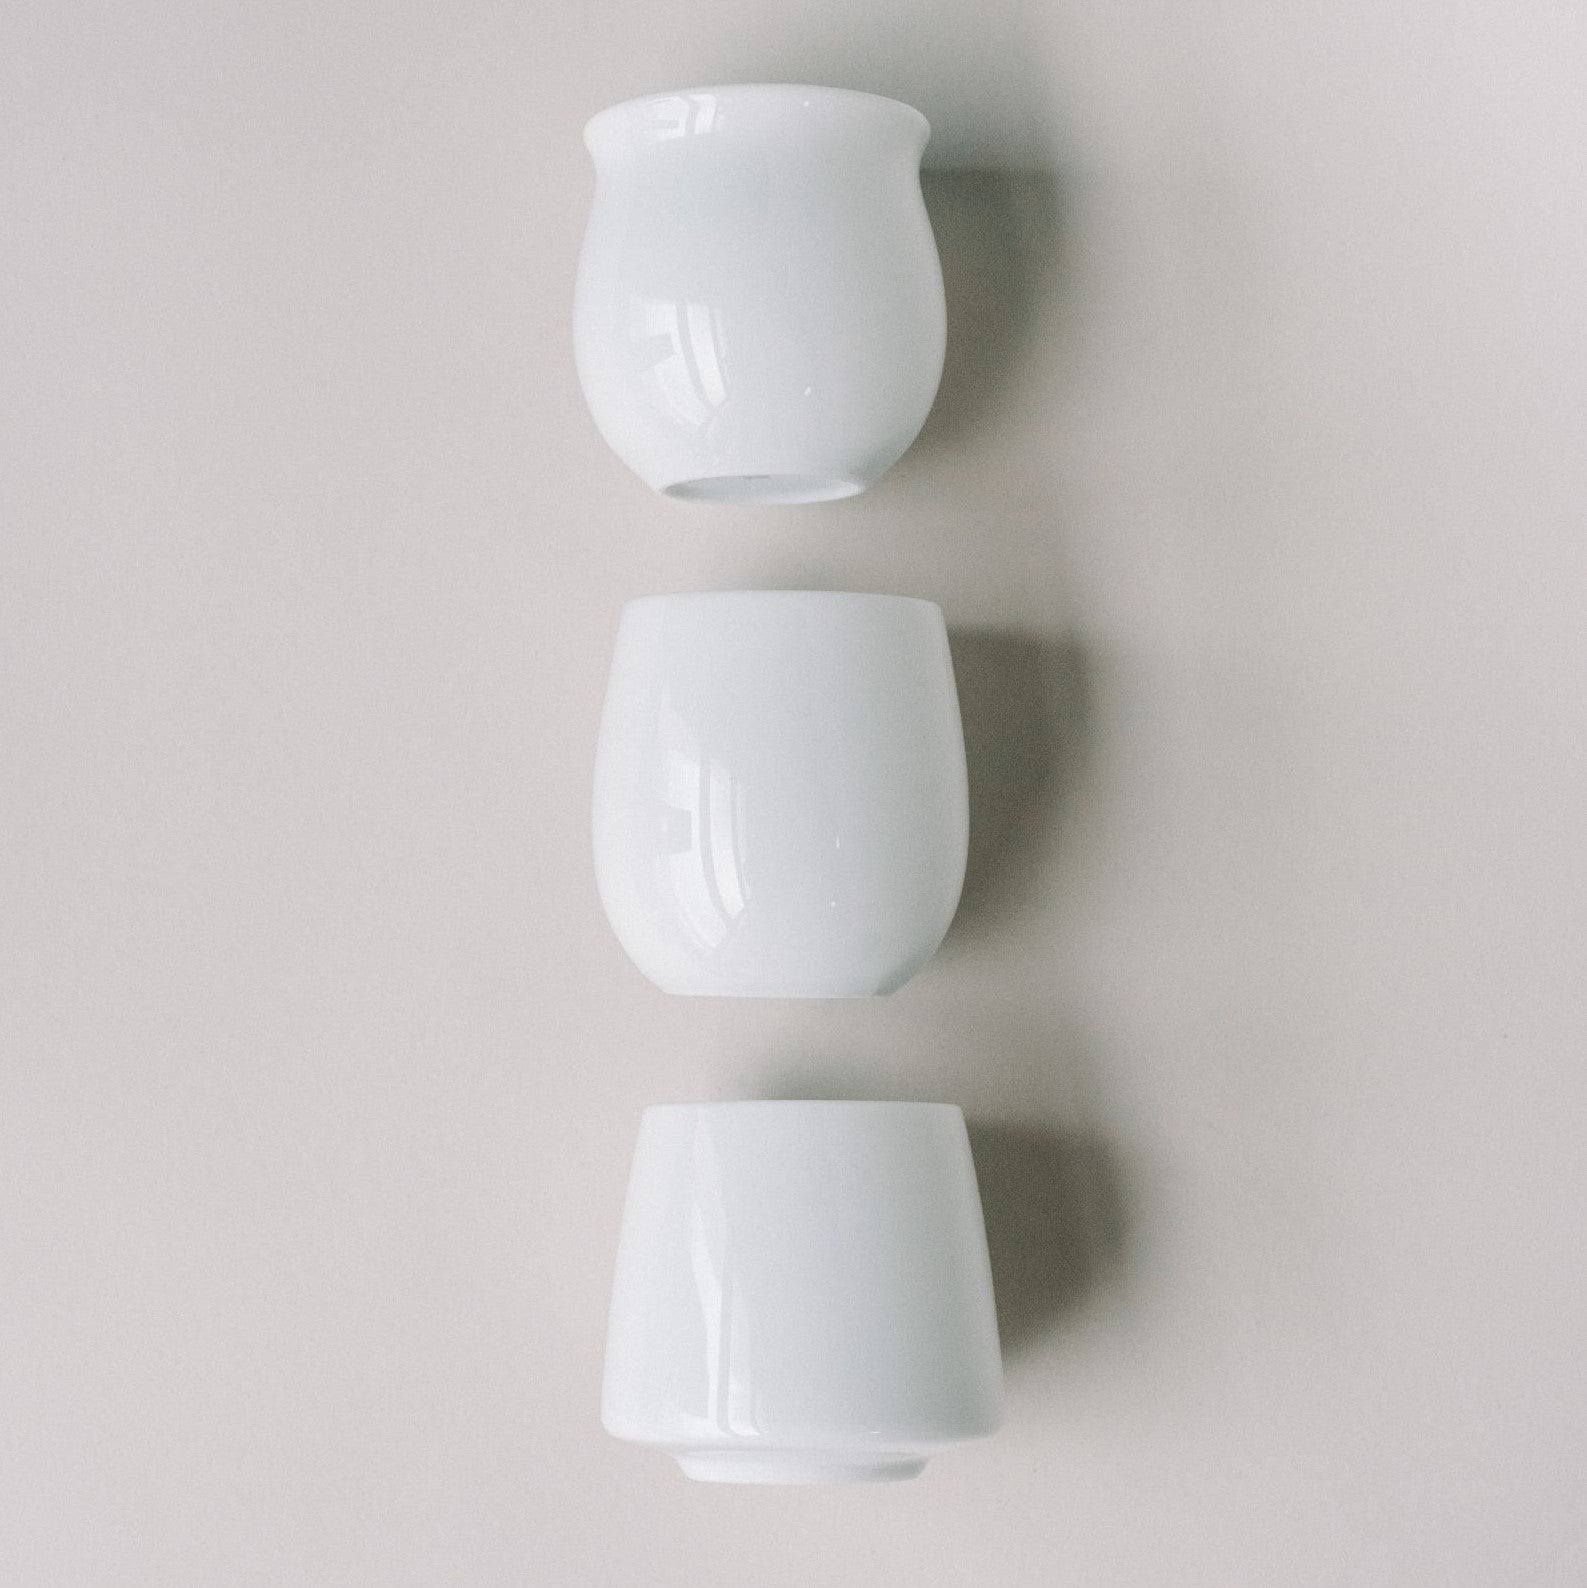 All three Origami Flavour cups in White